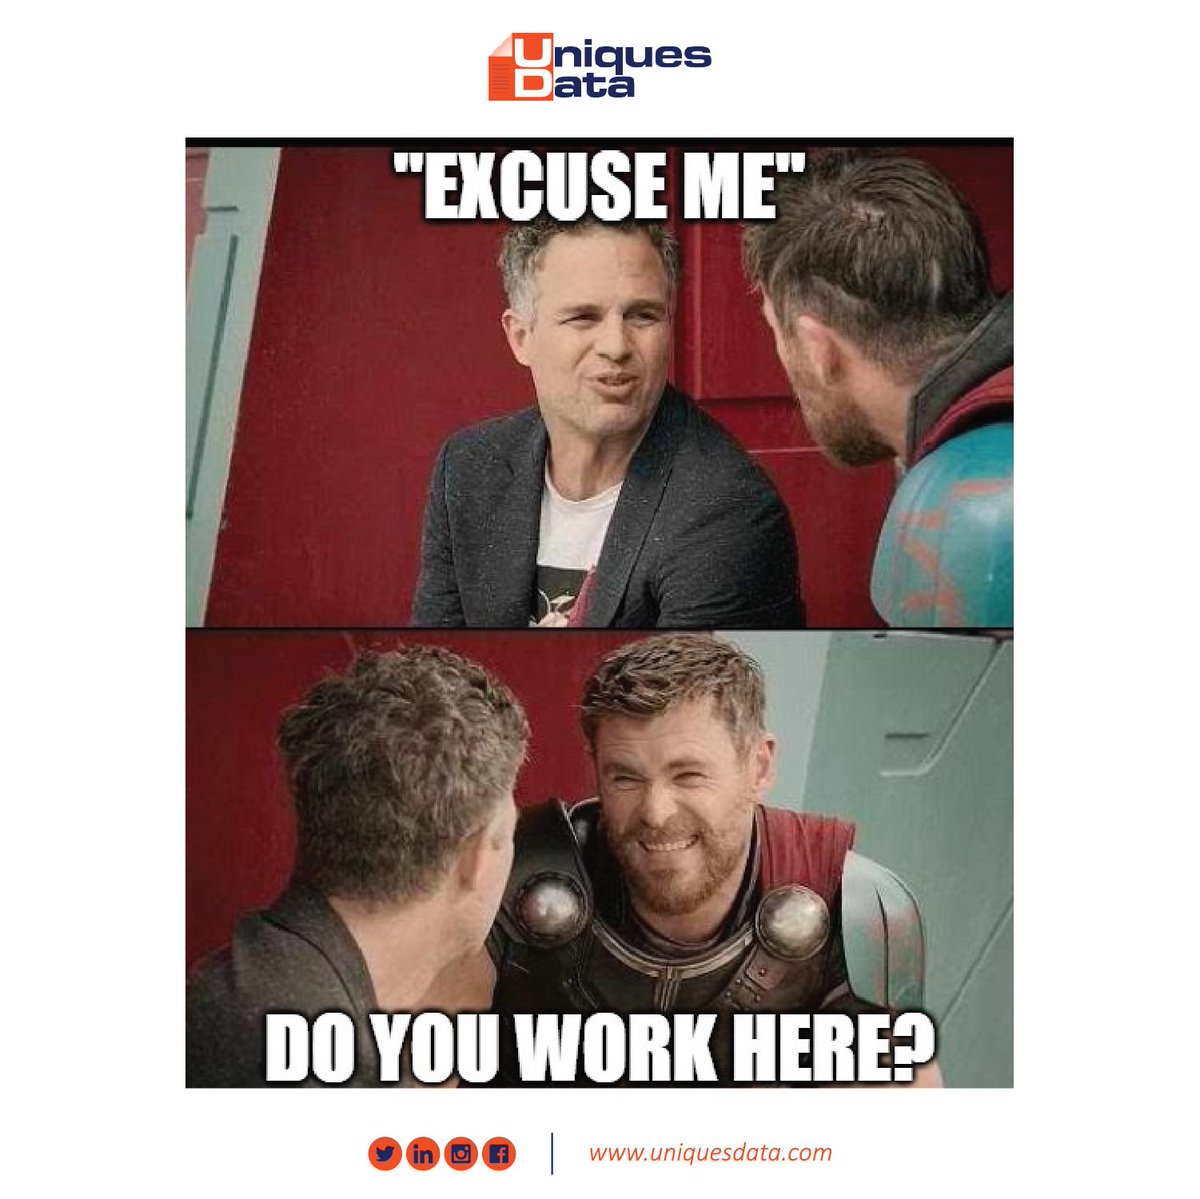 If you've ever felt stressed out or frustrated and someone asks a question
.
.
.
.
#workfunny #funnymemes #fridayquotes #weekend #weekendvibes #besmile #memesfordays #laughing #enjoyyourday #uniquesdataservices #uniquesdata #keepsmiling😊 #employers #workload